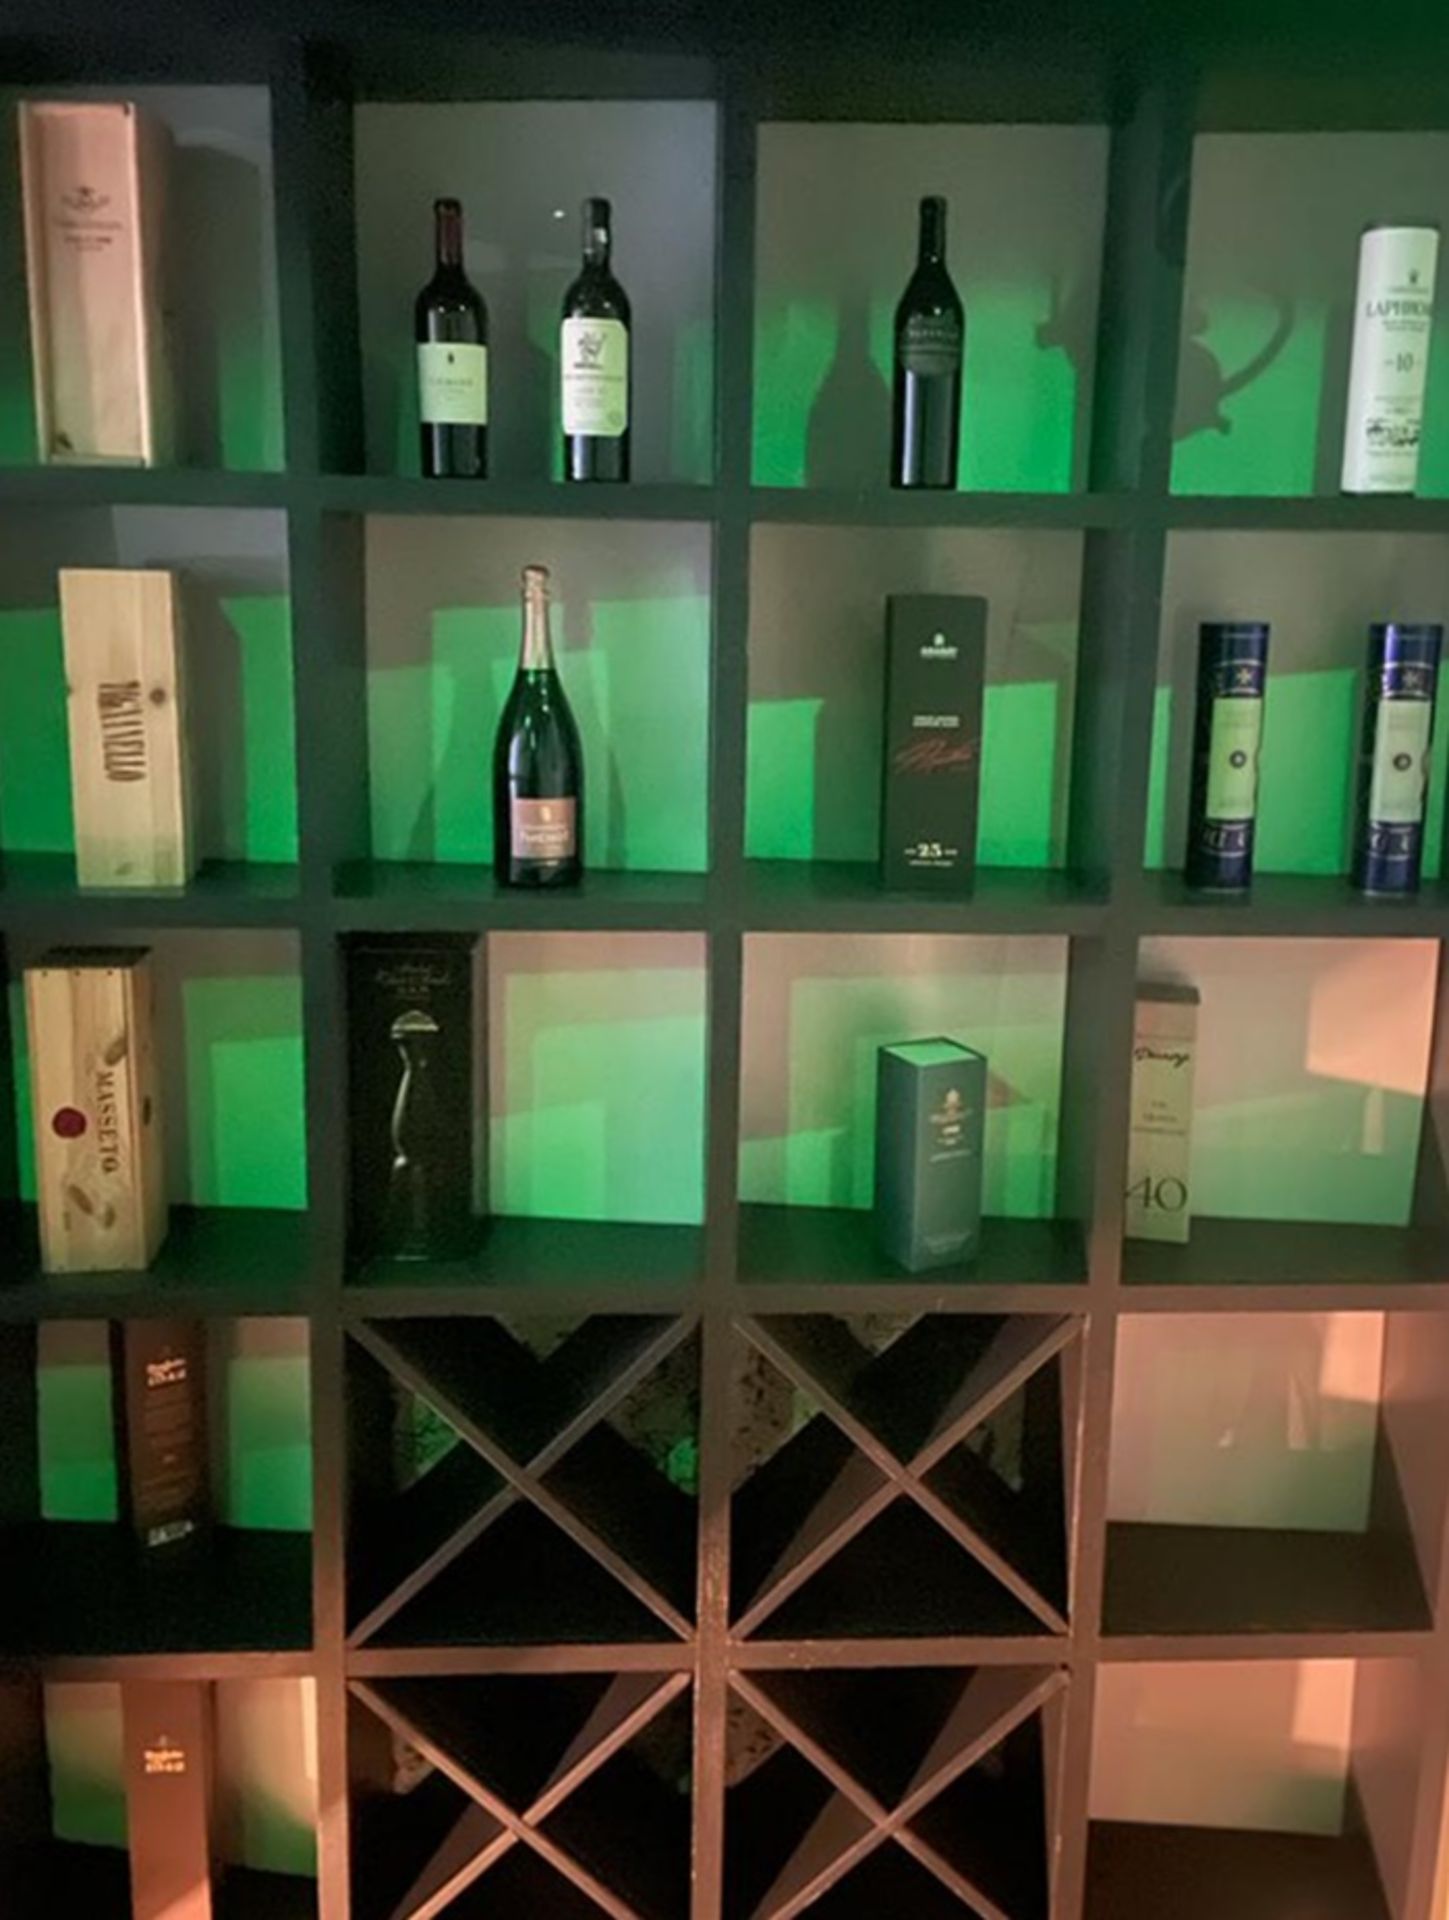 1 x Large Bespoke Shelving System For Displaying Books, Wine Bottles or Collectibles - More Pictures - Bild 8 aus 13